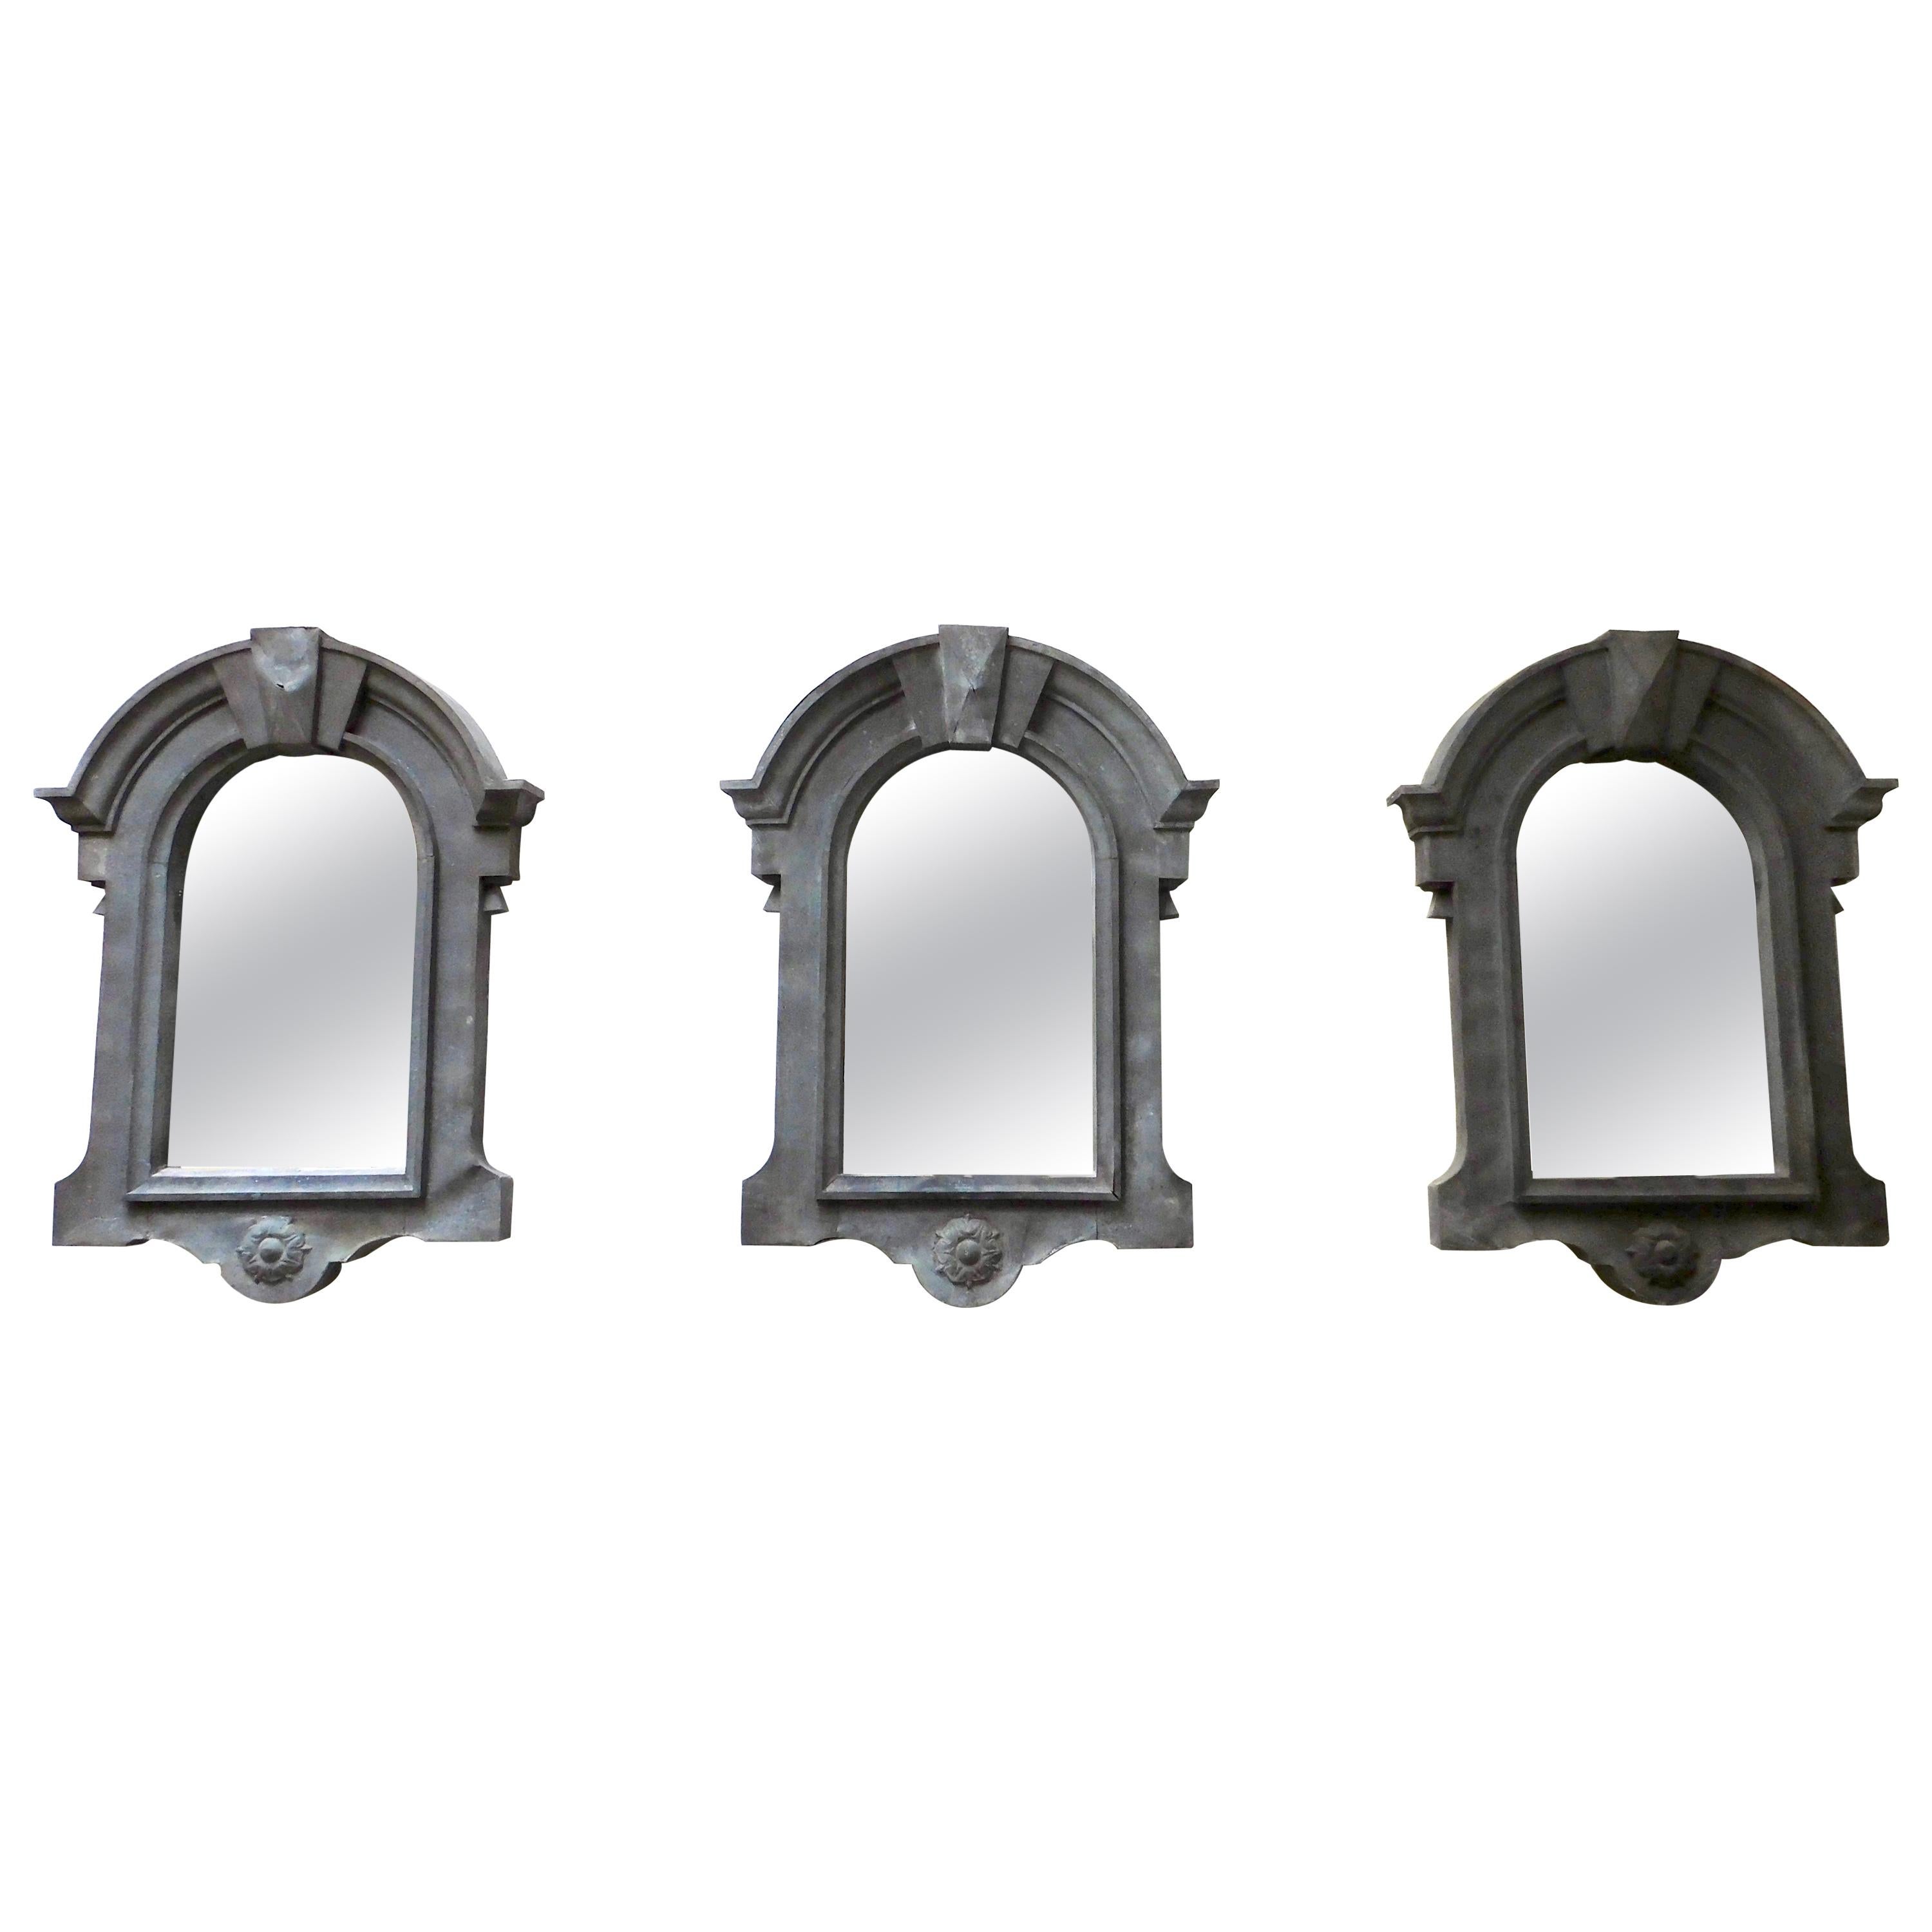 Three French Architectural Zinc Dormer Mirrors from the 19th Century For Sale